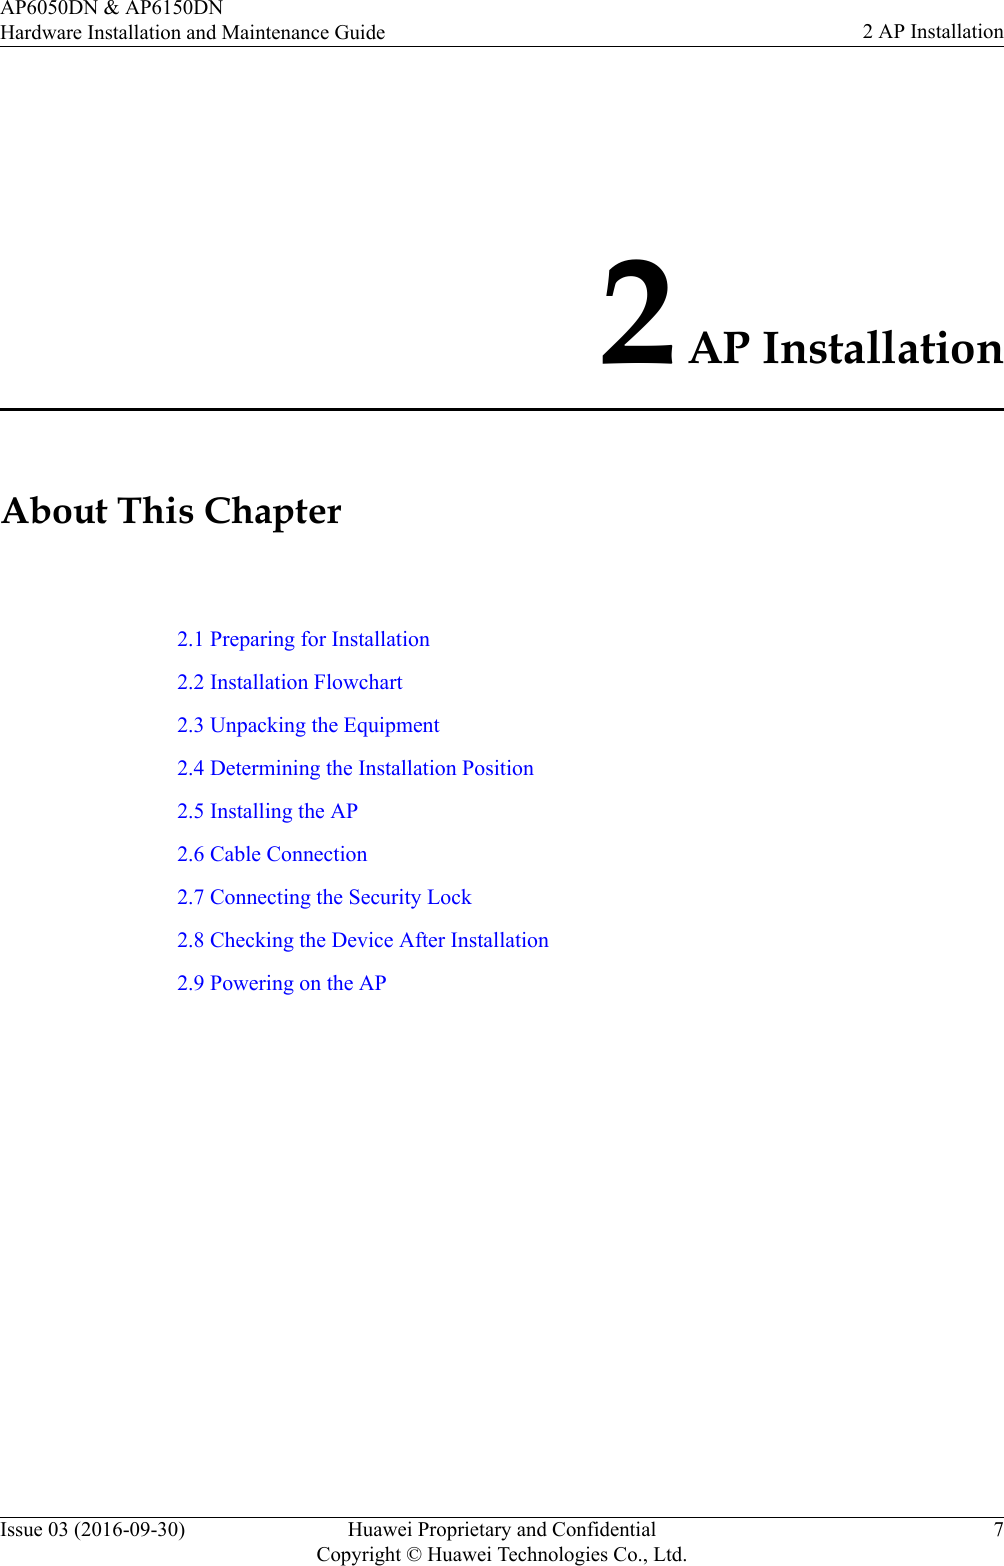 2 AP InstallationAbout This Chapter2.1 Preparing for Installation2.2 Installation Flowchart2.3 Unpacking the Equipment2.4 Determining the Installation Position2.5 Installing the AP2.6 Cable Connection2.7 Connecting the Security Lock2.8 Checking the Device After Installation2.9 Powering on the APAP6050DN &amp; AP6150DNHardware Installation and Maintenance Guide 2 AP InstallationIssue 03 (2016-09-30) Huawei Proprietary and ConfidentialCopyright © Huawei Technologies Co., Ltd.7